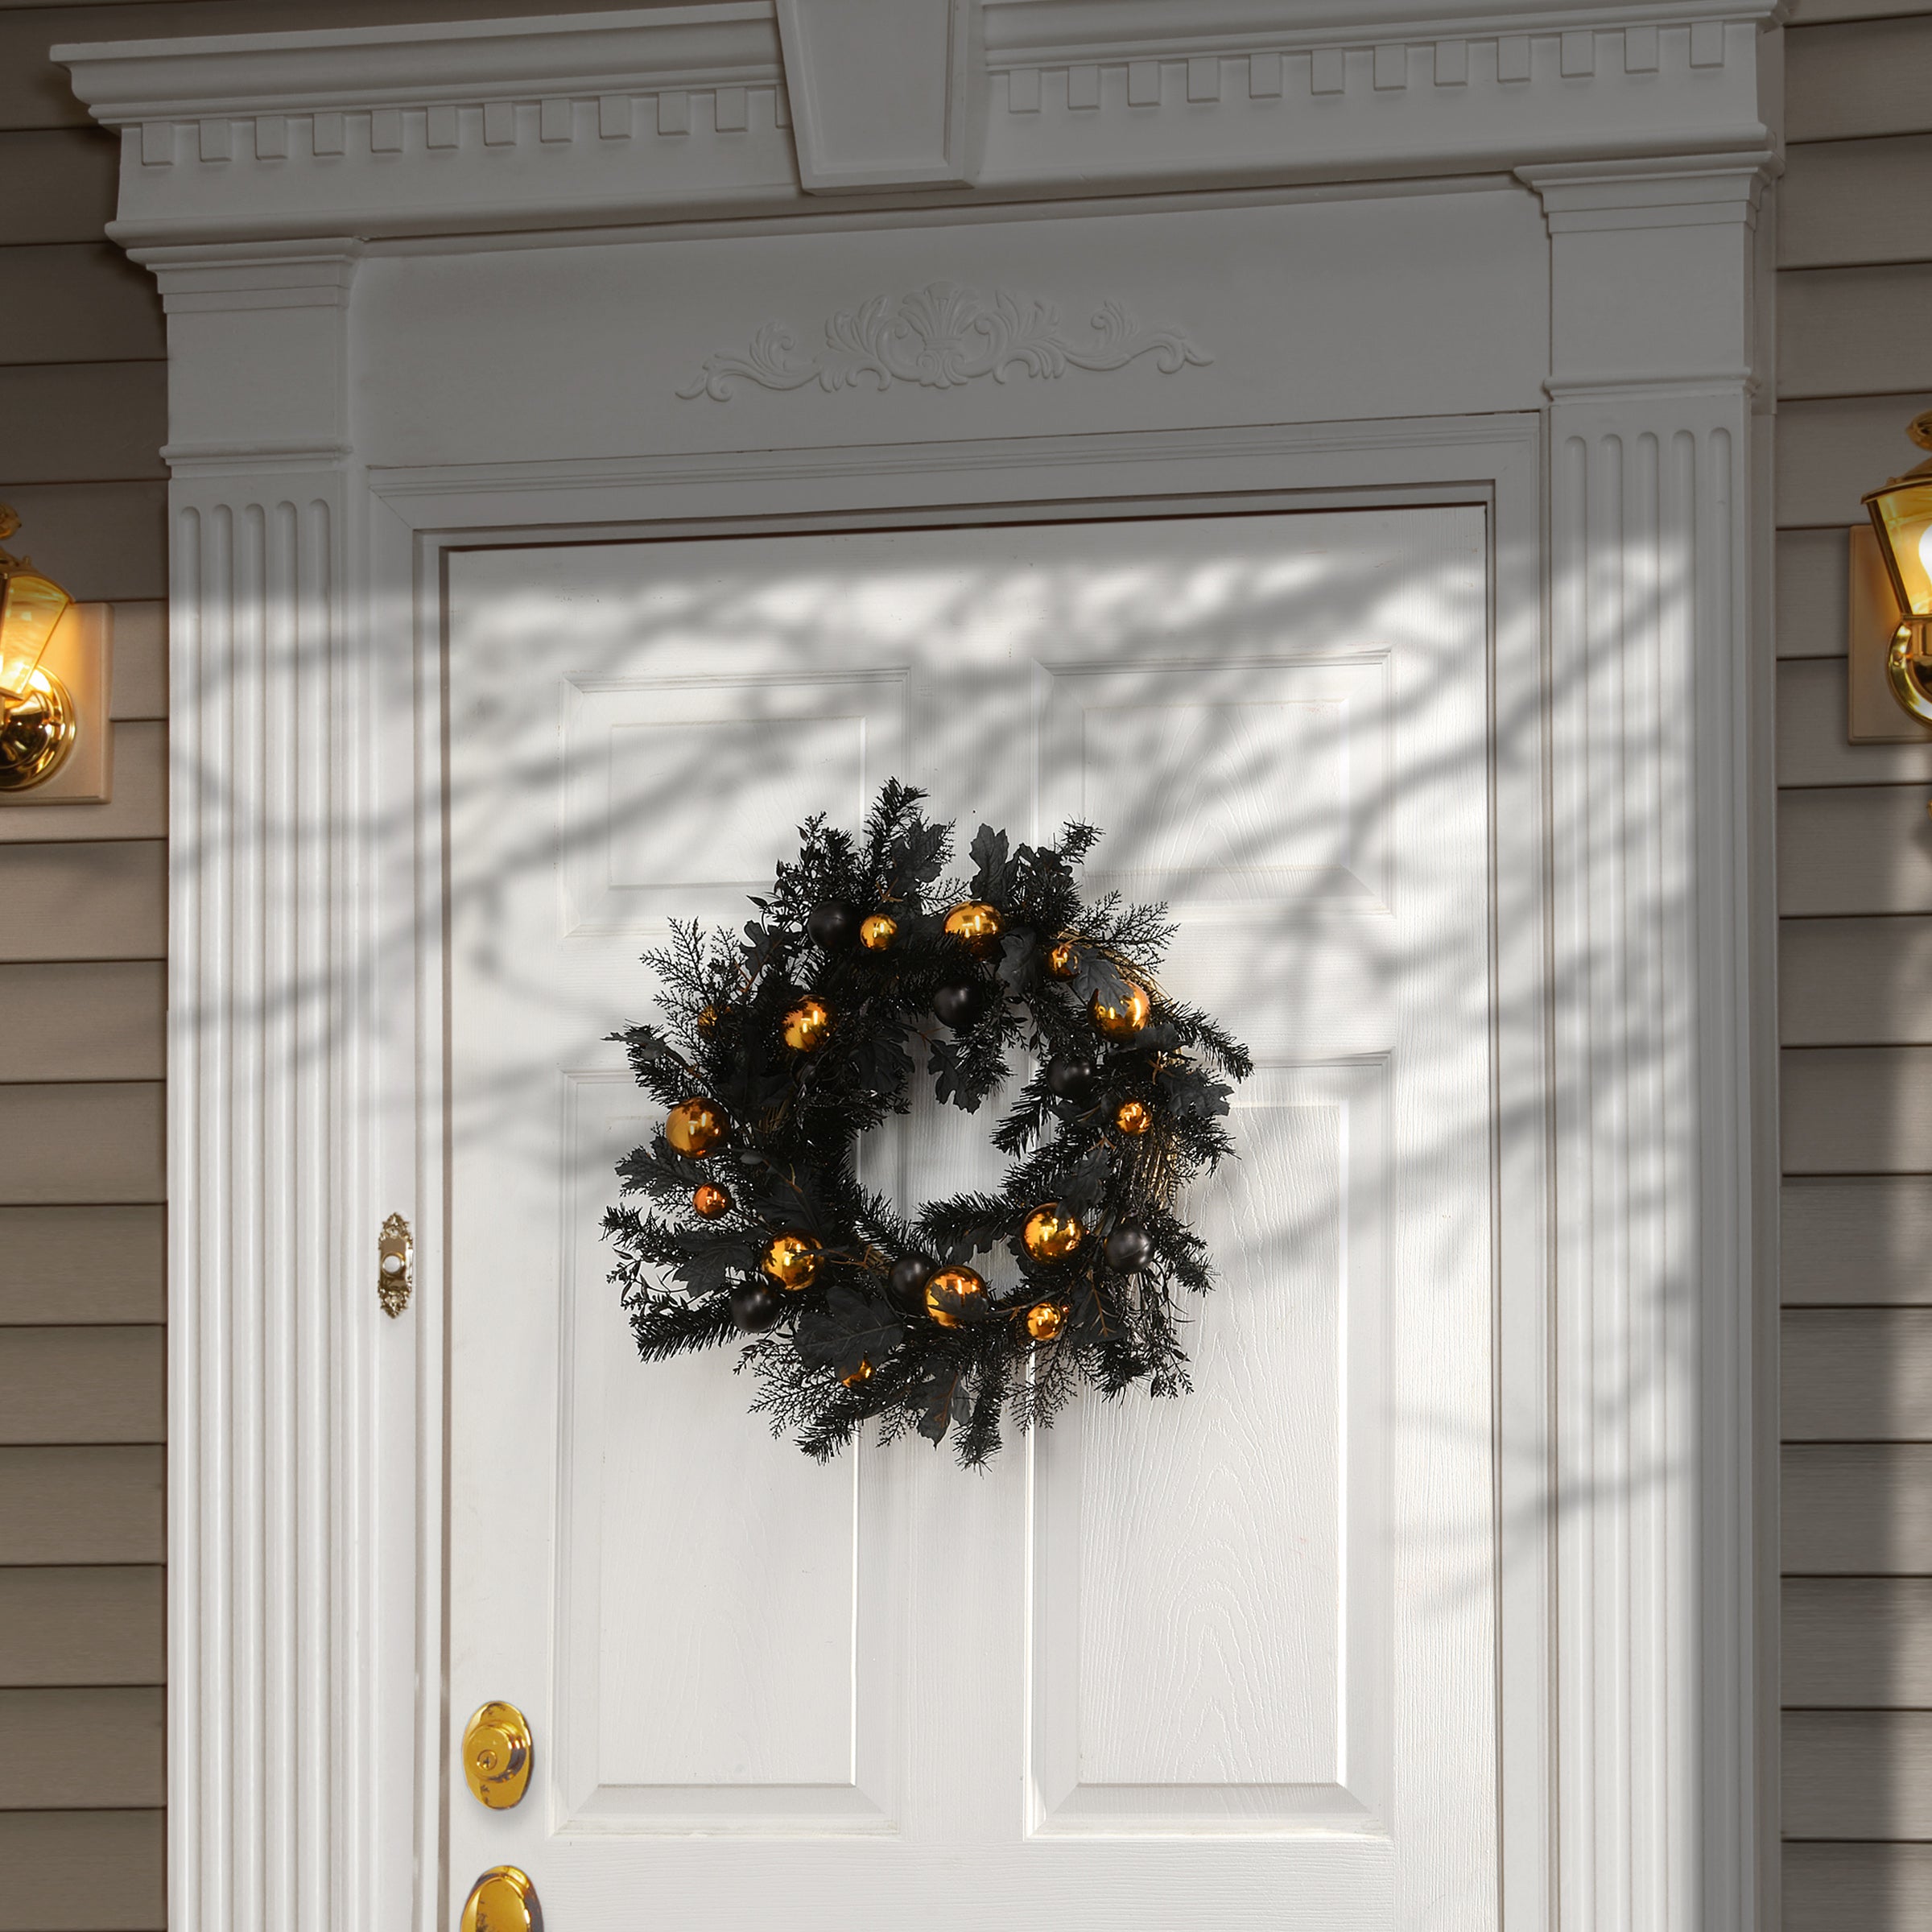 Halloween Artificial Wreath, Black, Decorated with Black and Orange Ball Ornaments, Leaves, 24 In